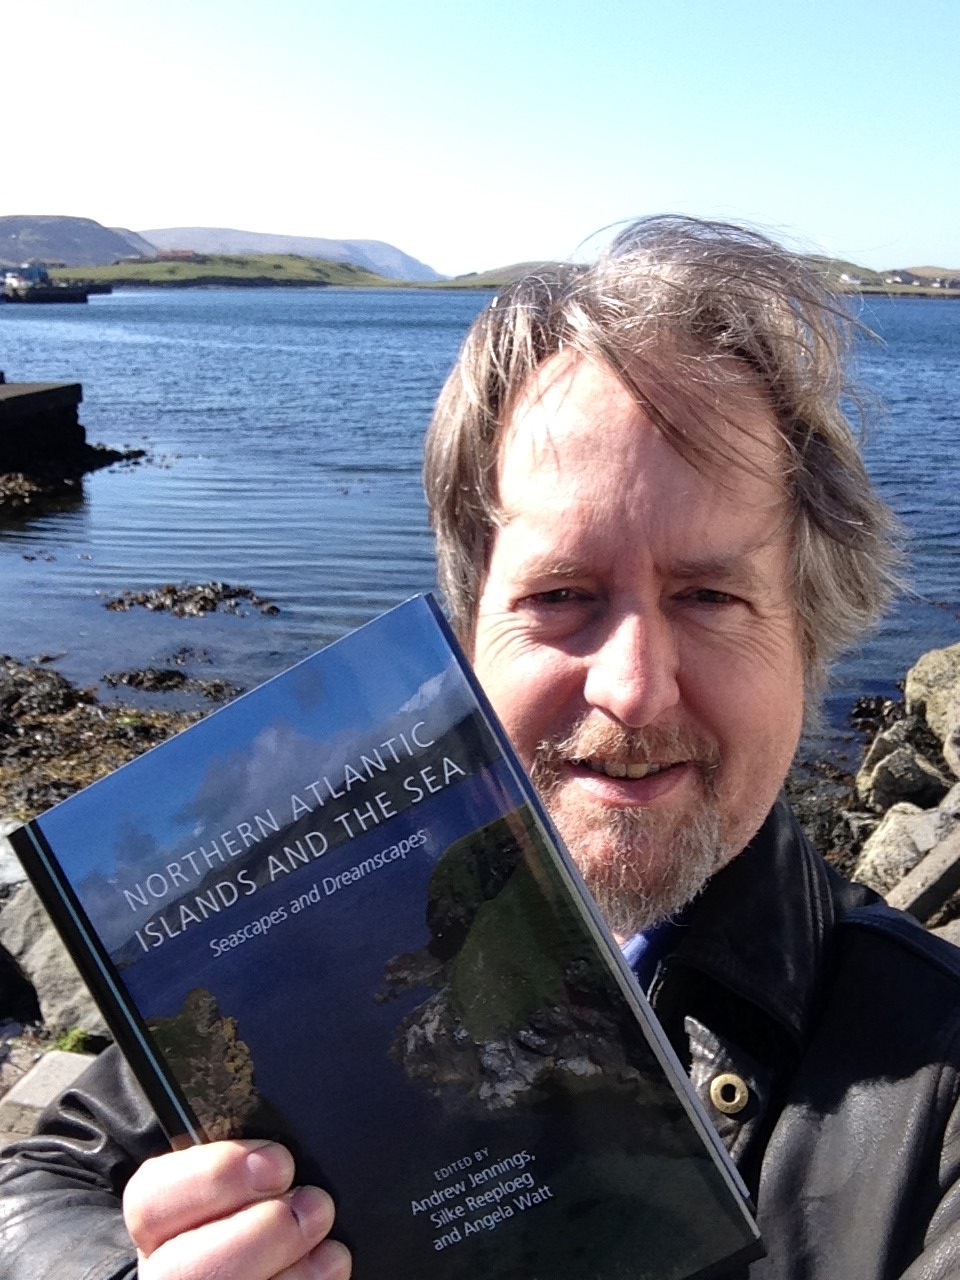 New Publication: Northern Atlantic Islands and the Sea: Seascapes and Dreamscapes